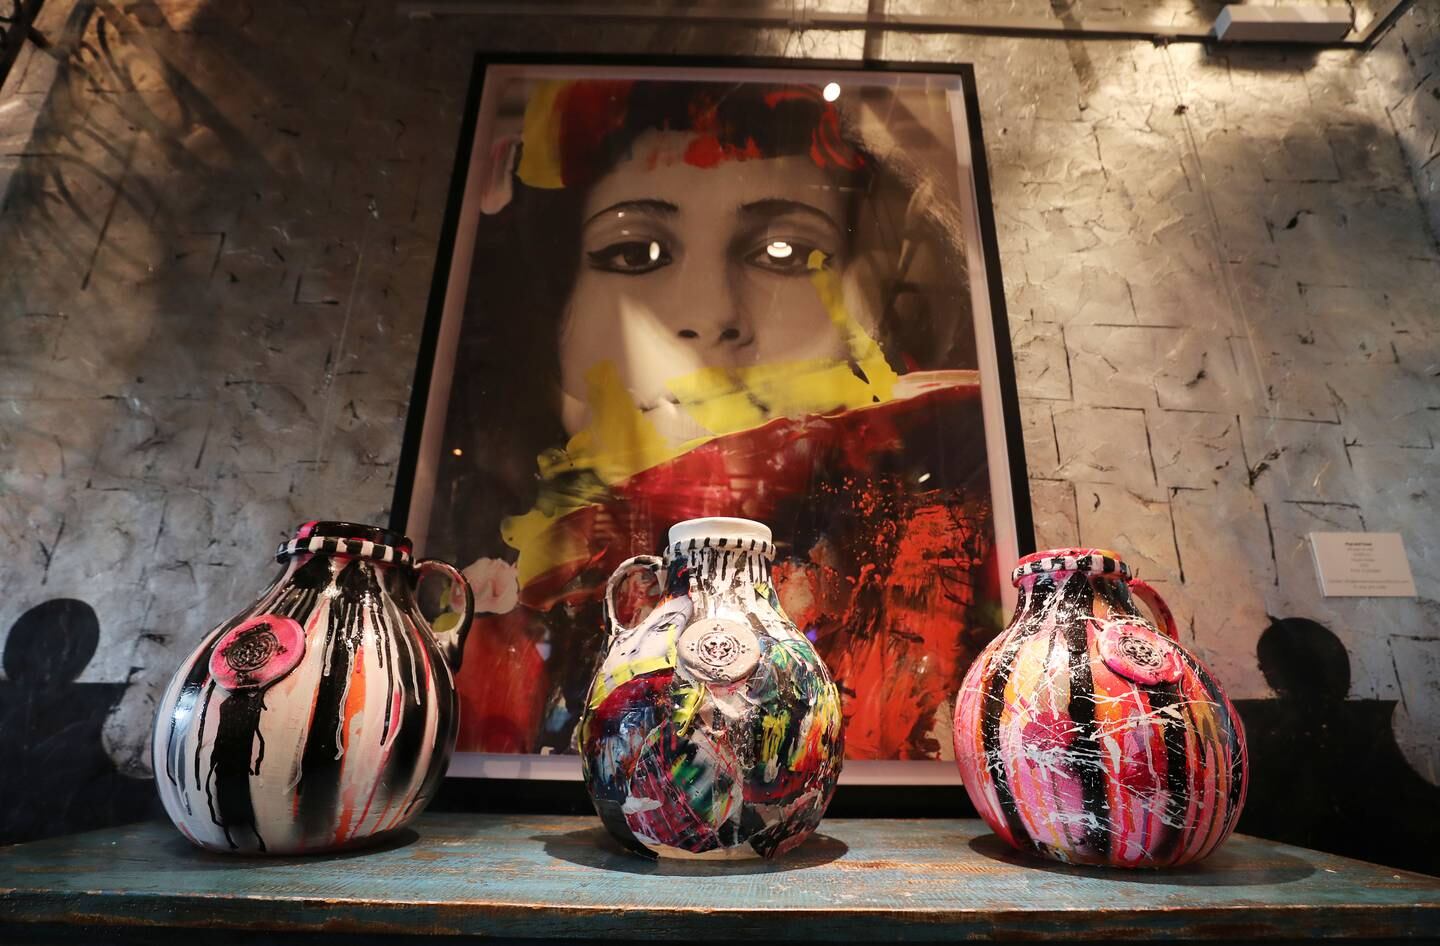 The Pisco jars at Coya Dubai, painted by regional artists such as Farida Abushady and Moza Almansoori. Chris Whiteoak / The National